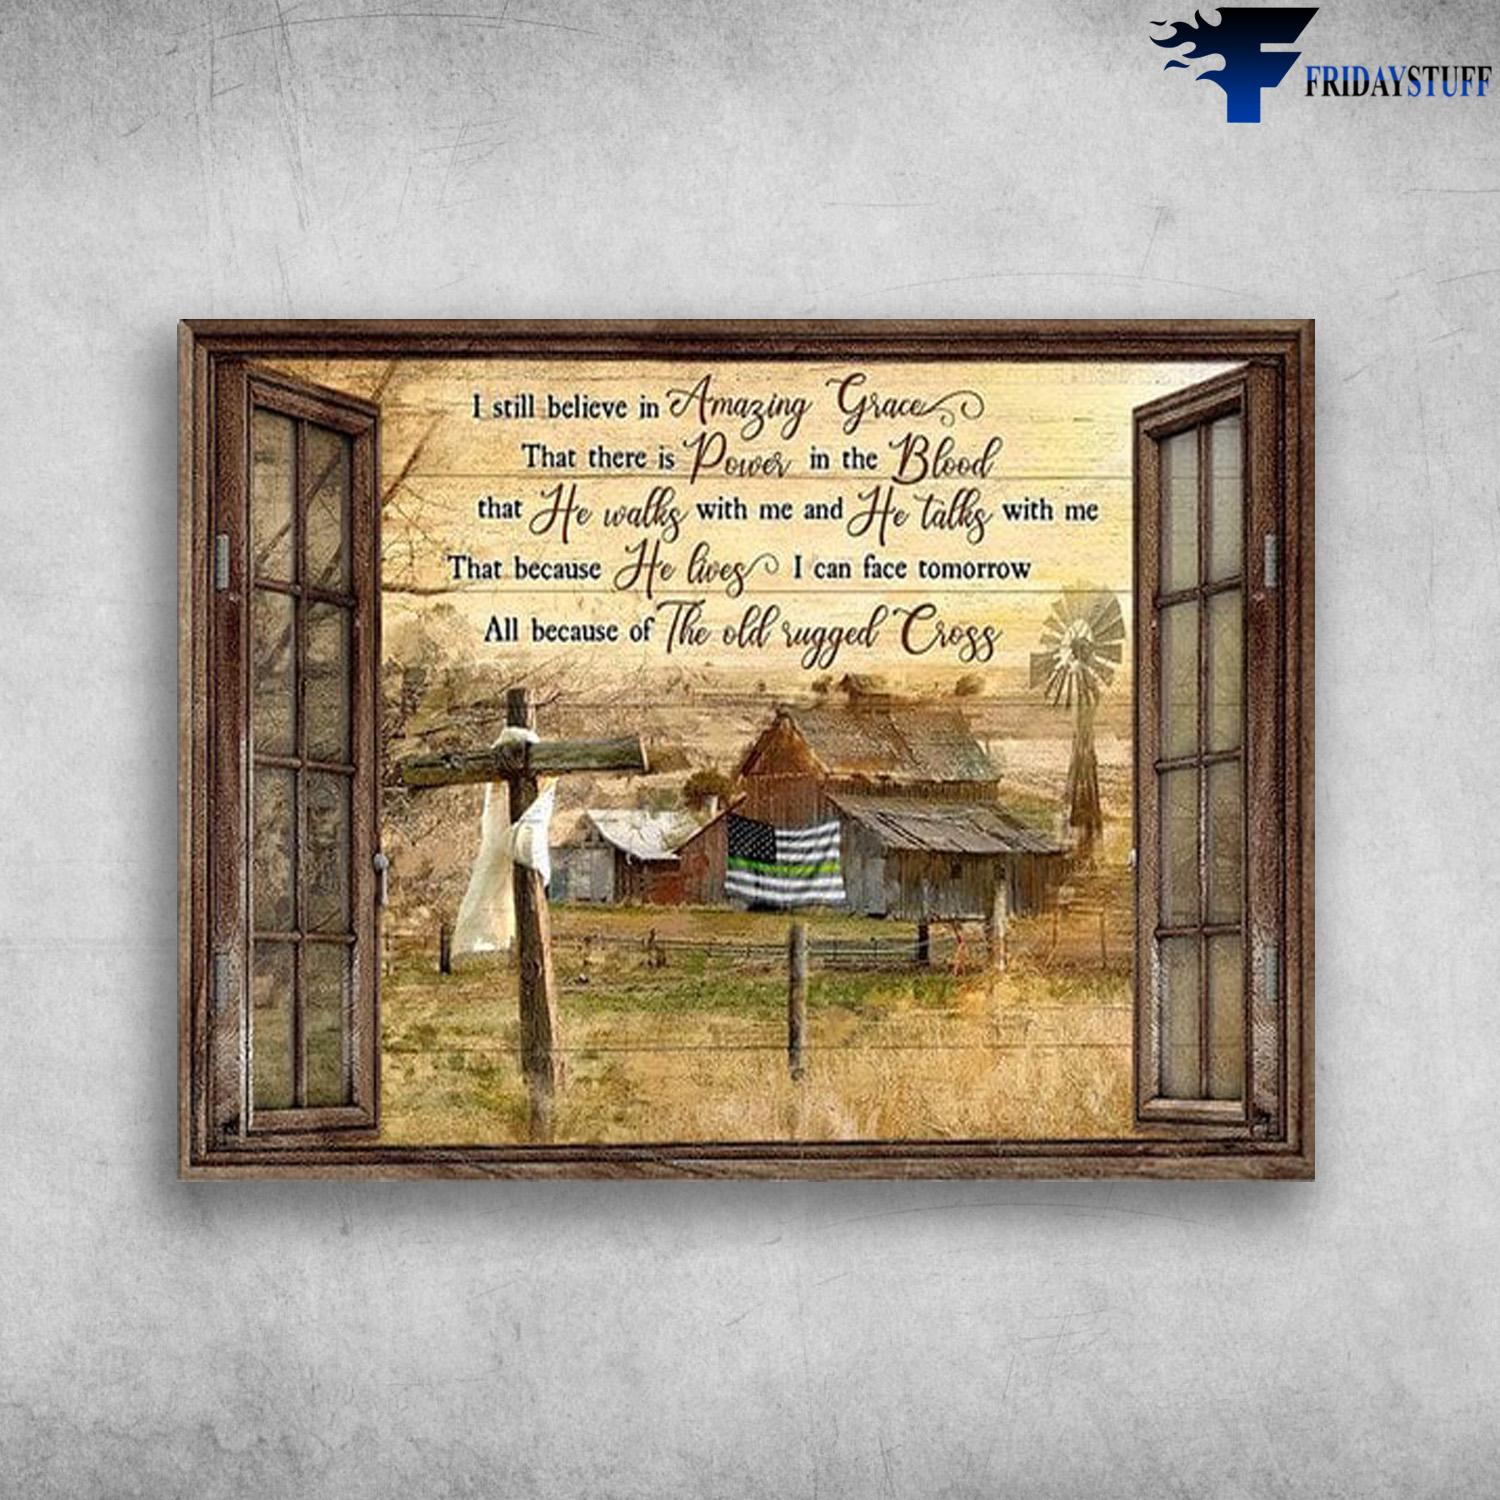 Farmer Poster, Farmer's Gift - I Still Believe In Amazing Grace, That There Is Power In The Blood, That He Walks With Me, And He Talks With Me, The Old Rugged Cross